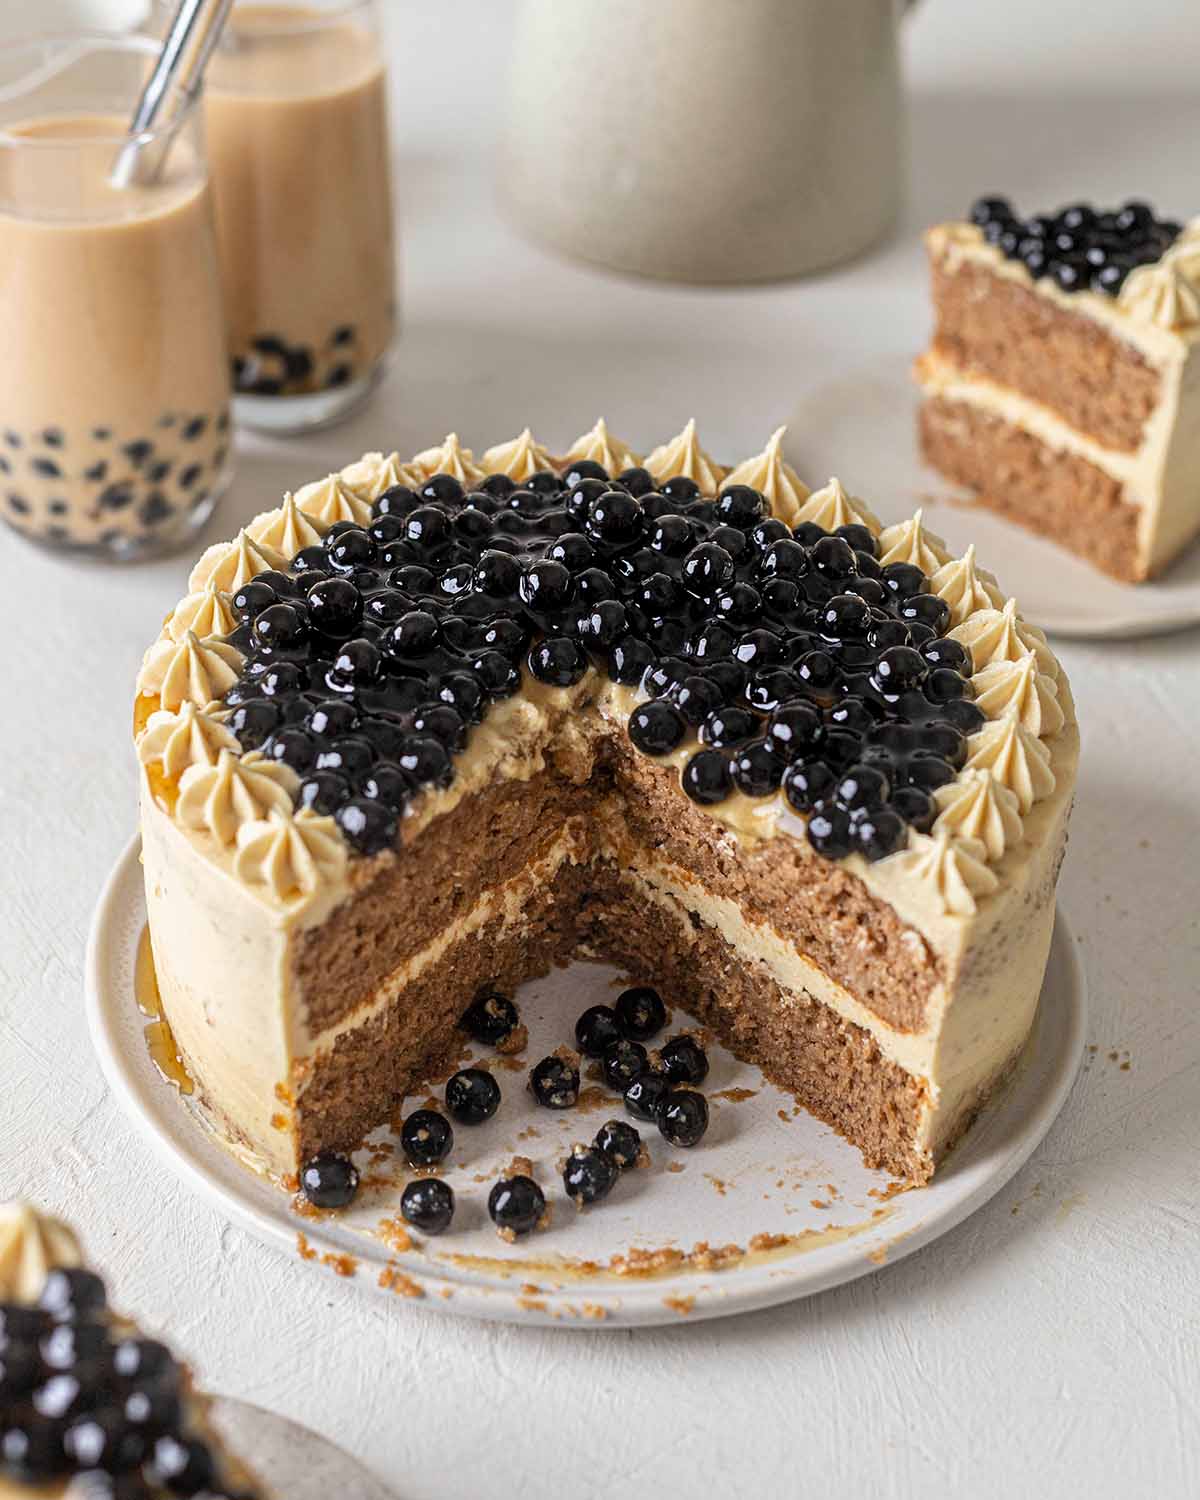 Two-layered vegan boba cake cut open showing sponge layers. Cake is topped with shiny tapioca pearls.